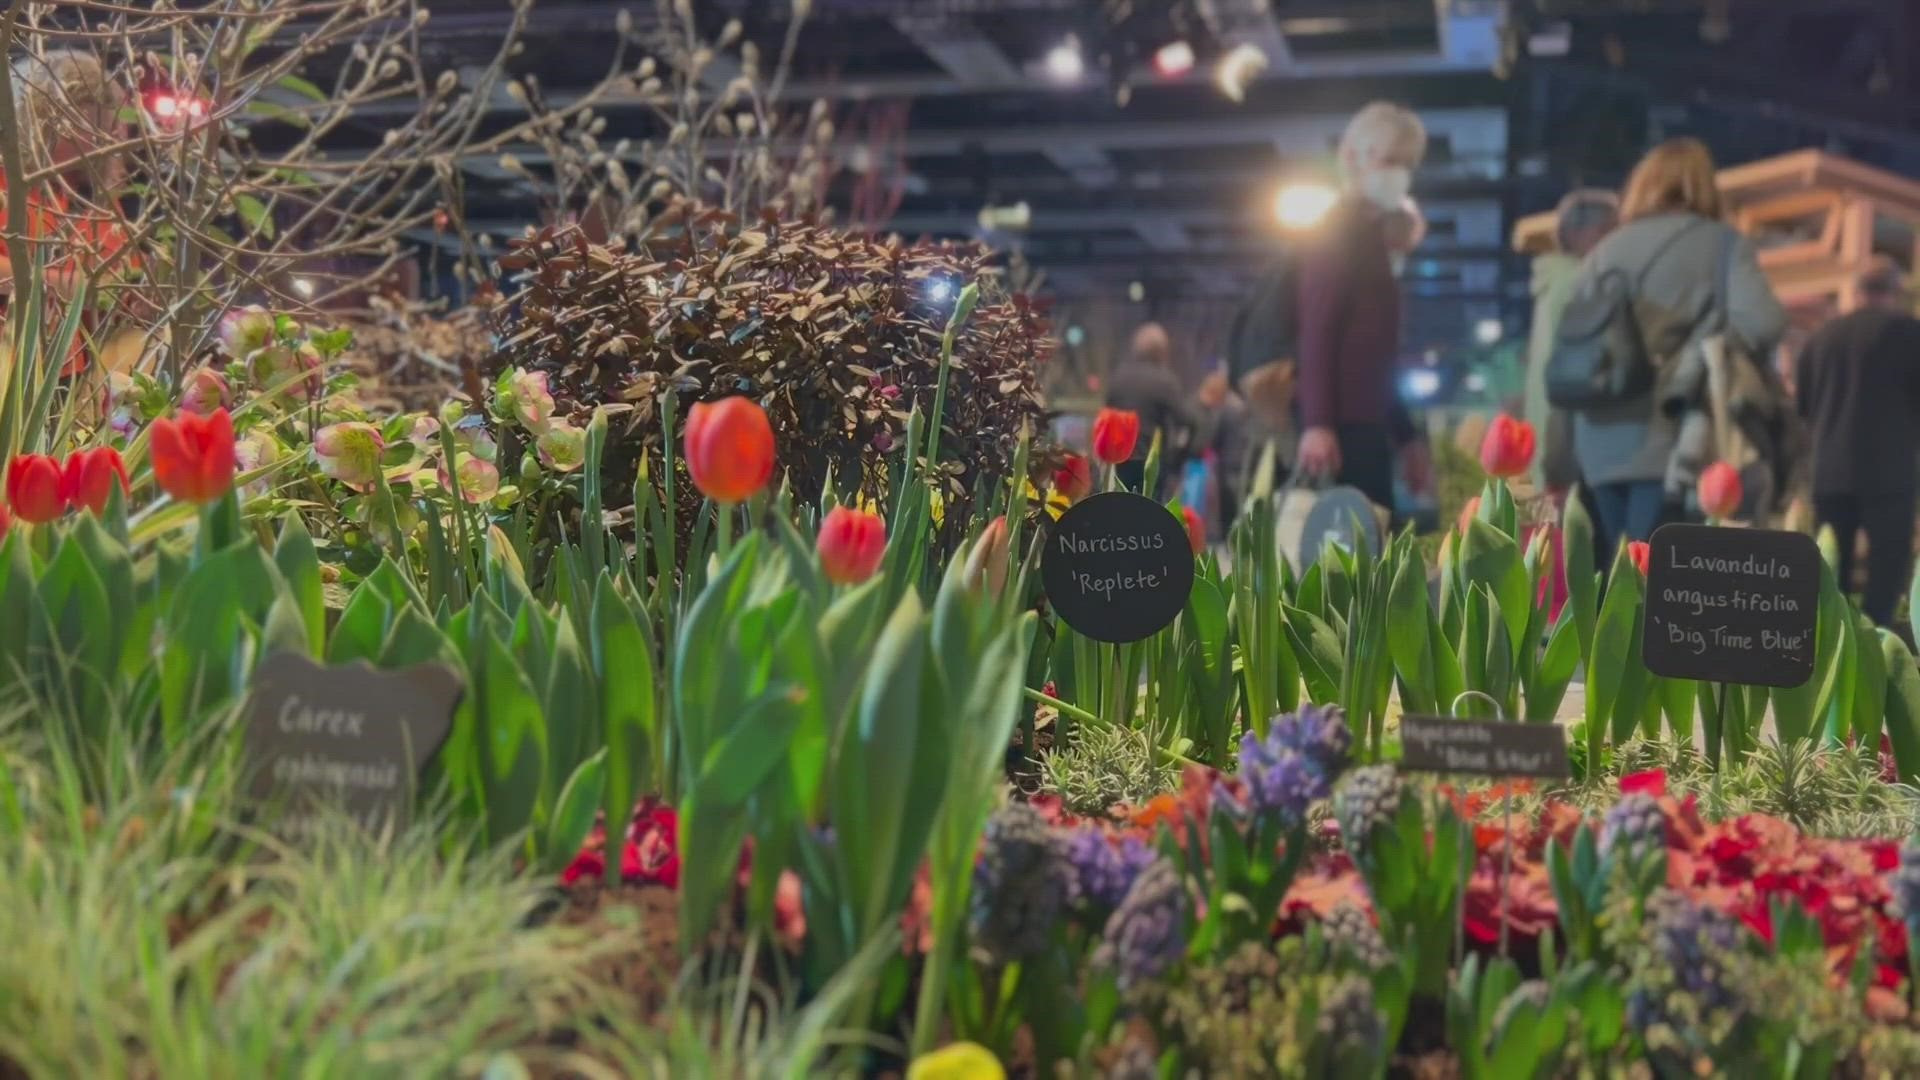 The annual flower and garden show is happening now at the Seattle Convention Center.